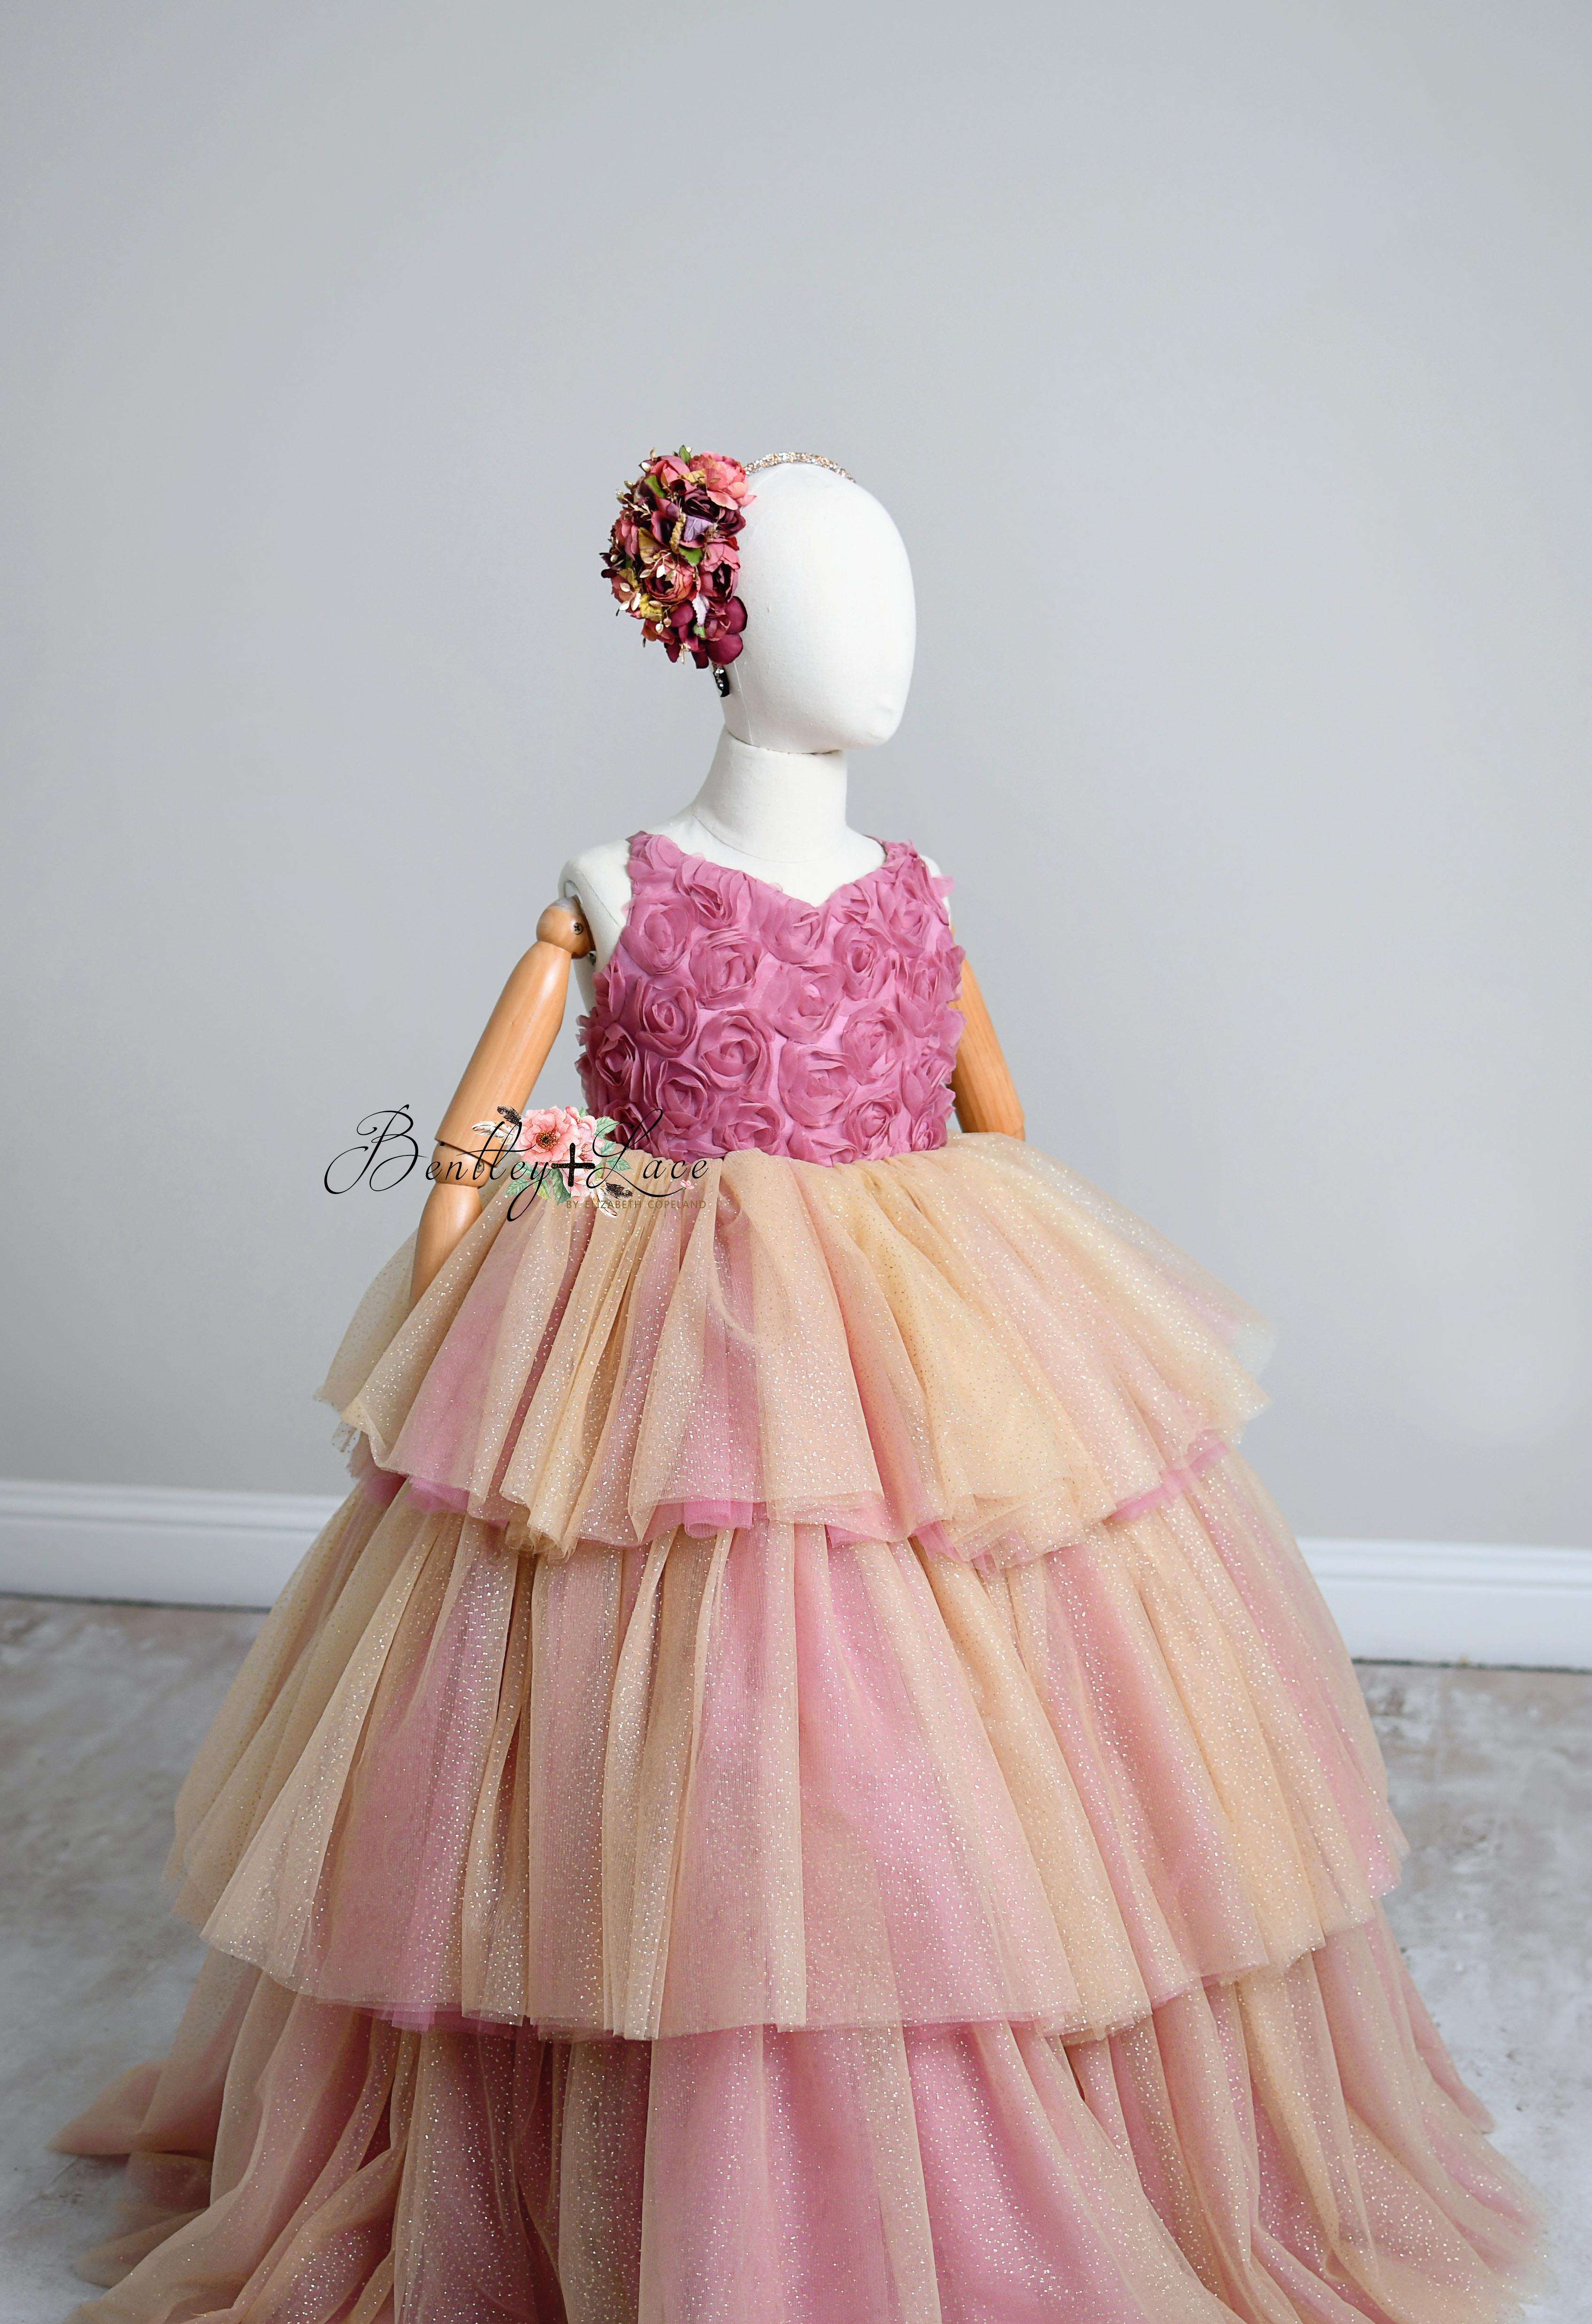 Layers of tiered tulle in shades of gold and blush, creating a dreamy skirt.